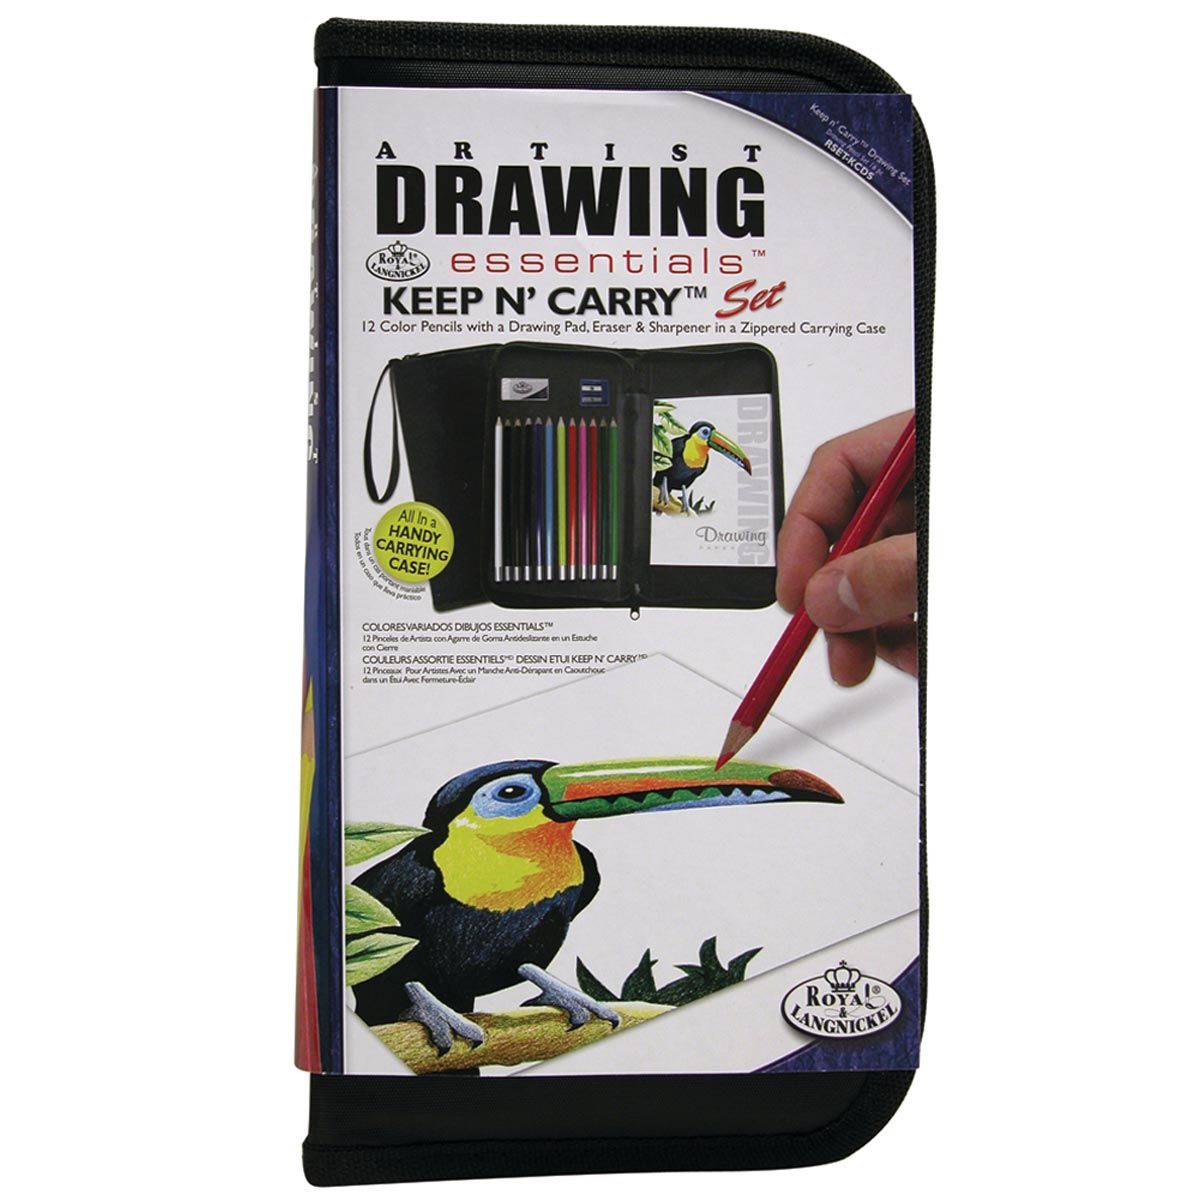 Keep N' Carry Essentials Drawing 16pc Set